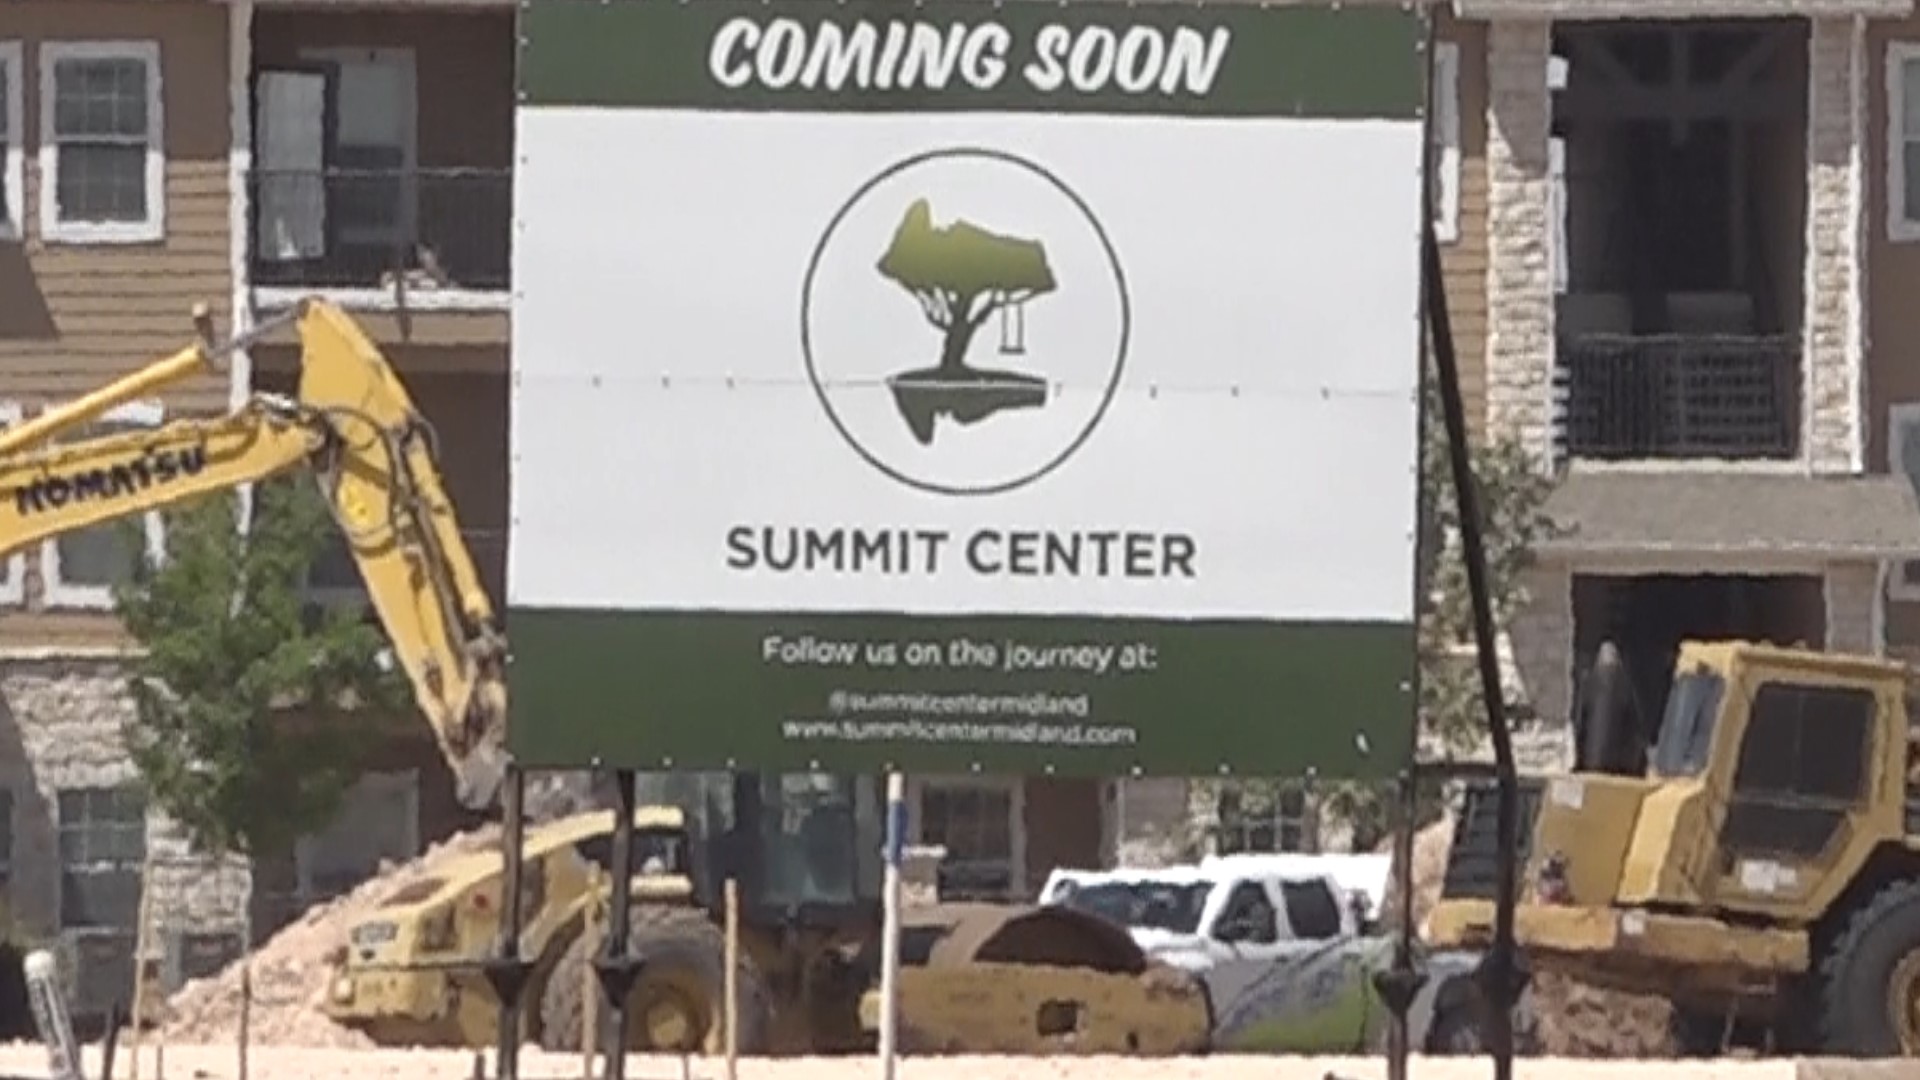 Summit Center Midland will open in Spring 2024, bringing restaurants, retail and more. Neighbors of the center think it will be good for the area.